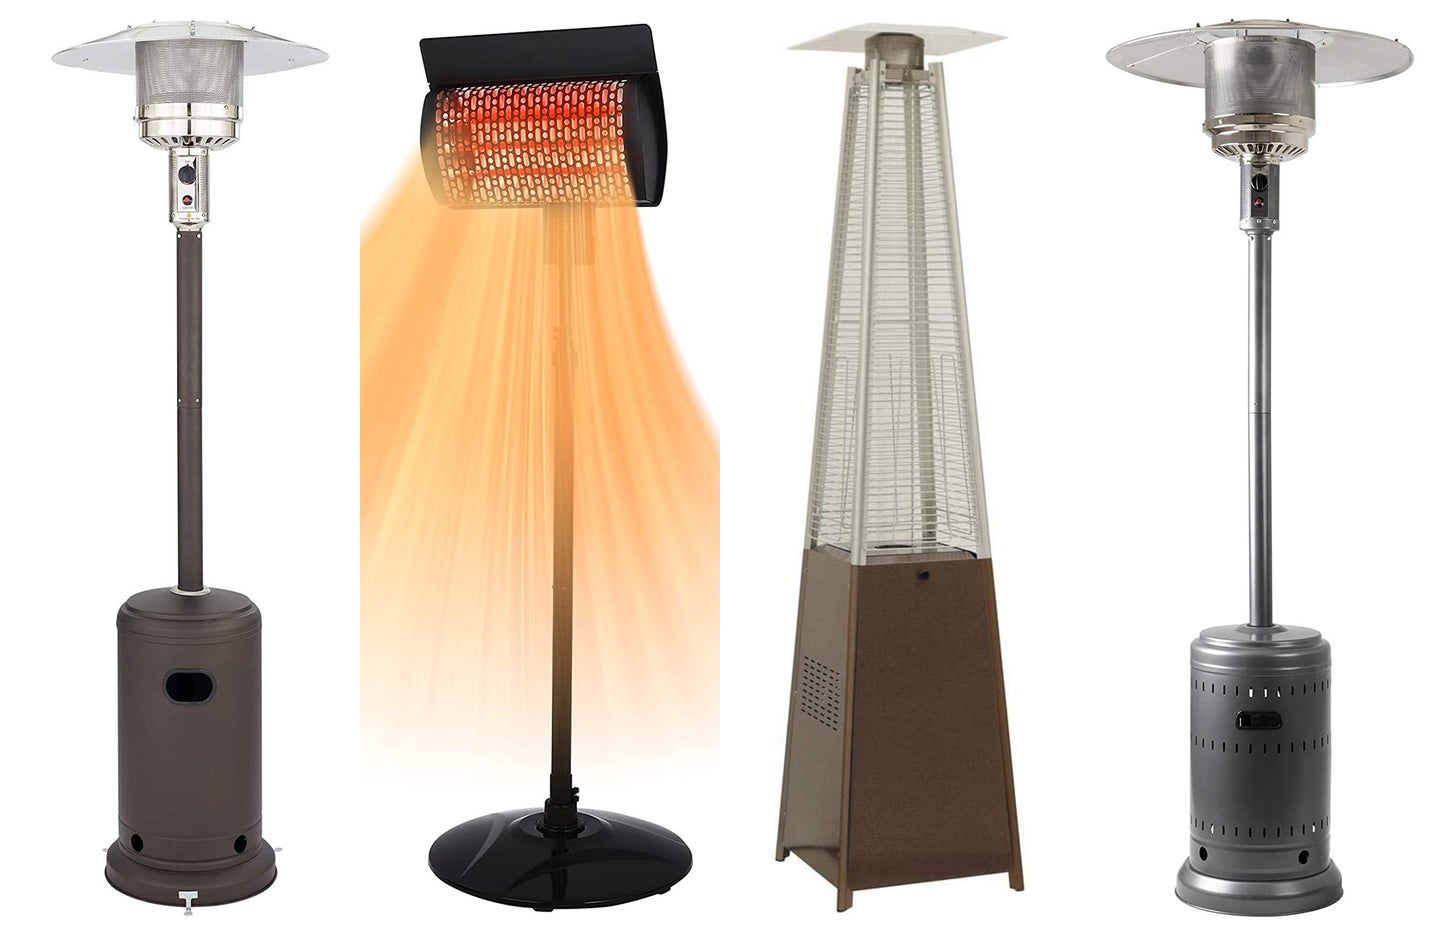 The best patios heaters lined up on a white background